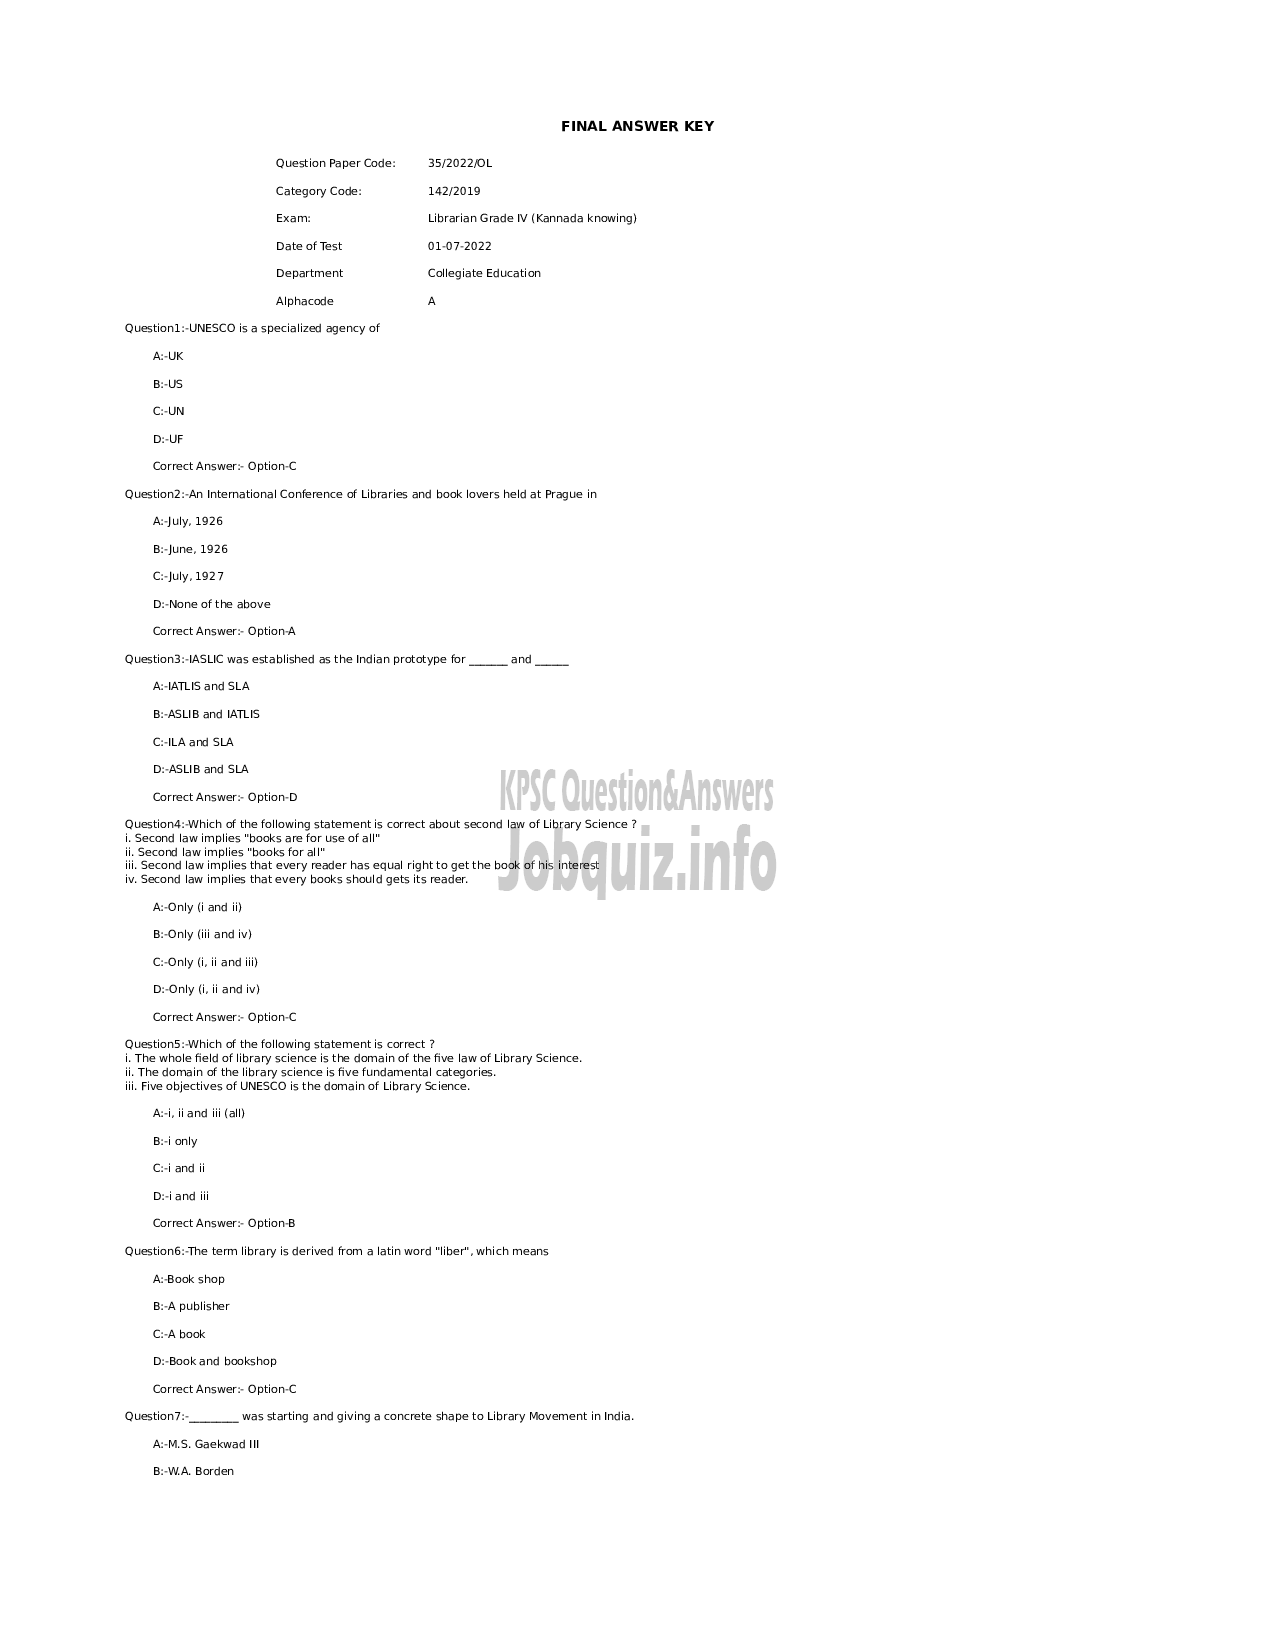 Kerala PSC Question Paper - Librarian Grade IV (Kannada knowing)-1